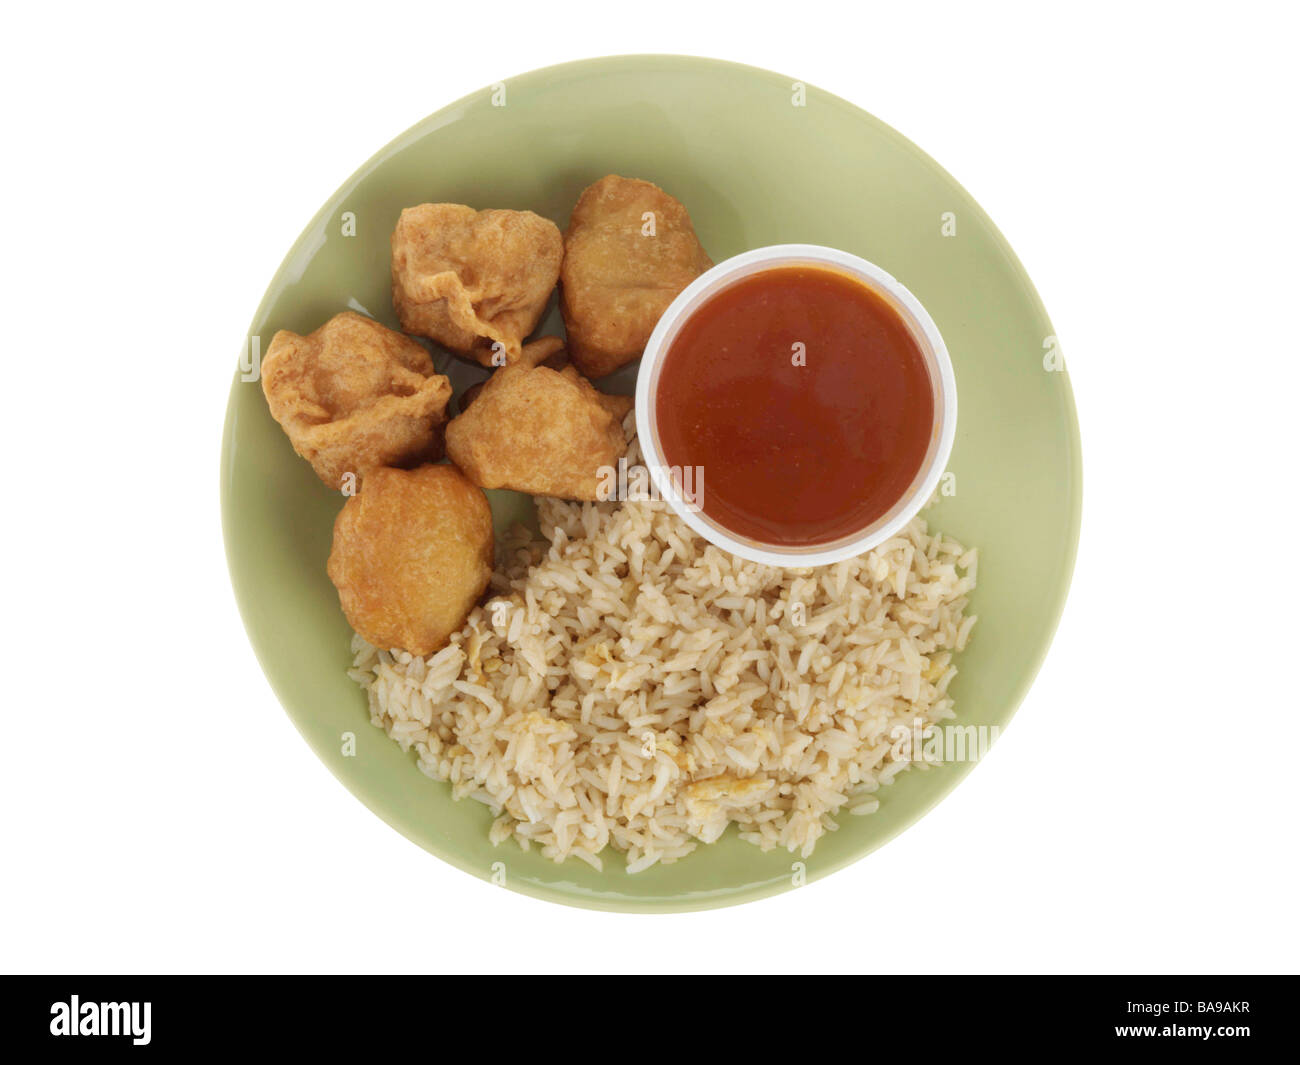 Freshly Cooked Authentic Chinese Style Sweet and Sour Chicken Balls With Rice Isolated Against A White Background With No People And A Clipping Path Stock Photo